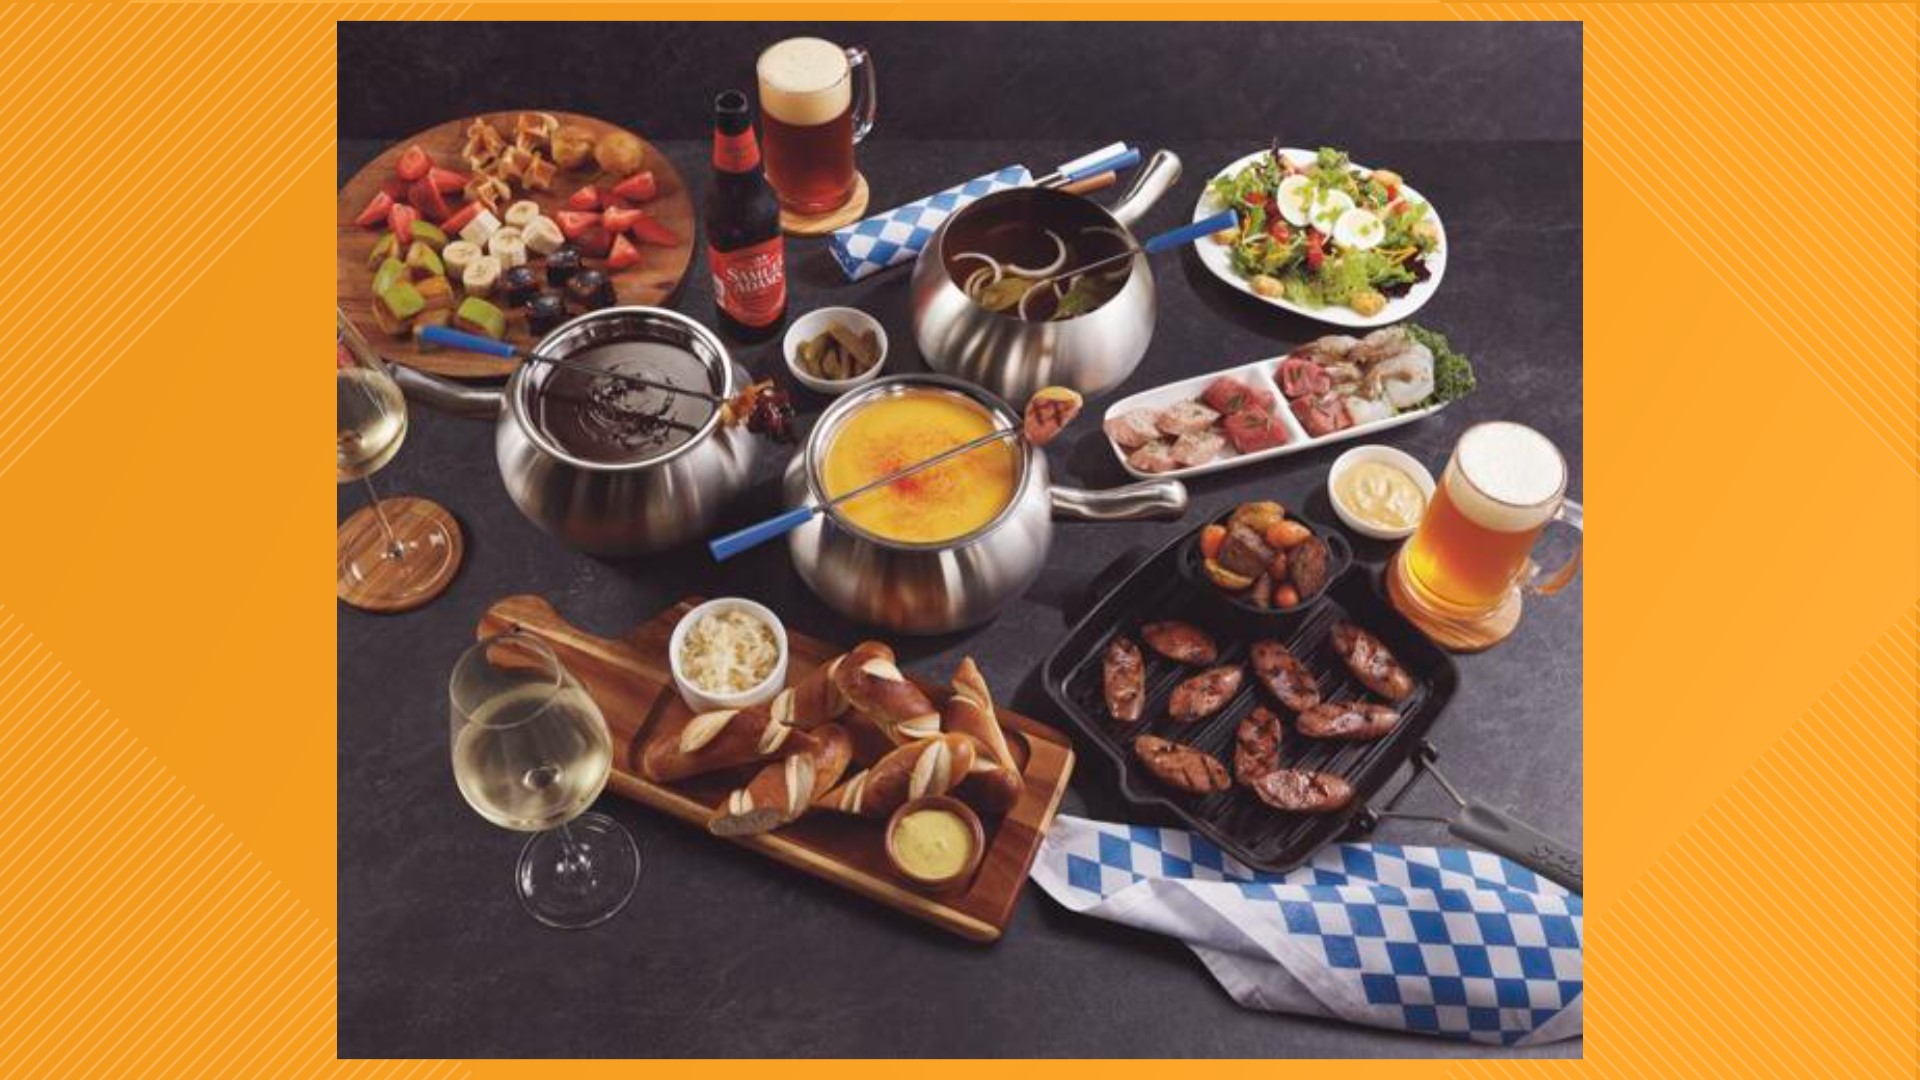 Celebrate Oktoberfest at The Melting Pot with their Oktober Fondue Fest complete with Bavarian beer cheese and Black Forest Chocolate Fondue.